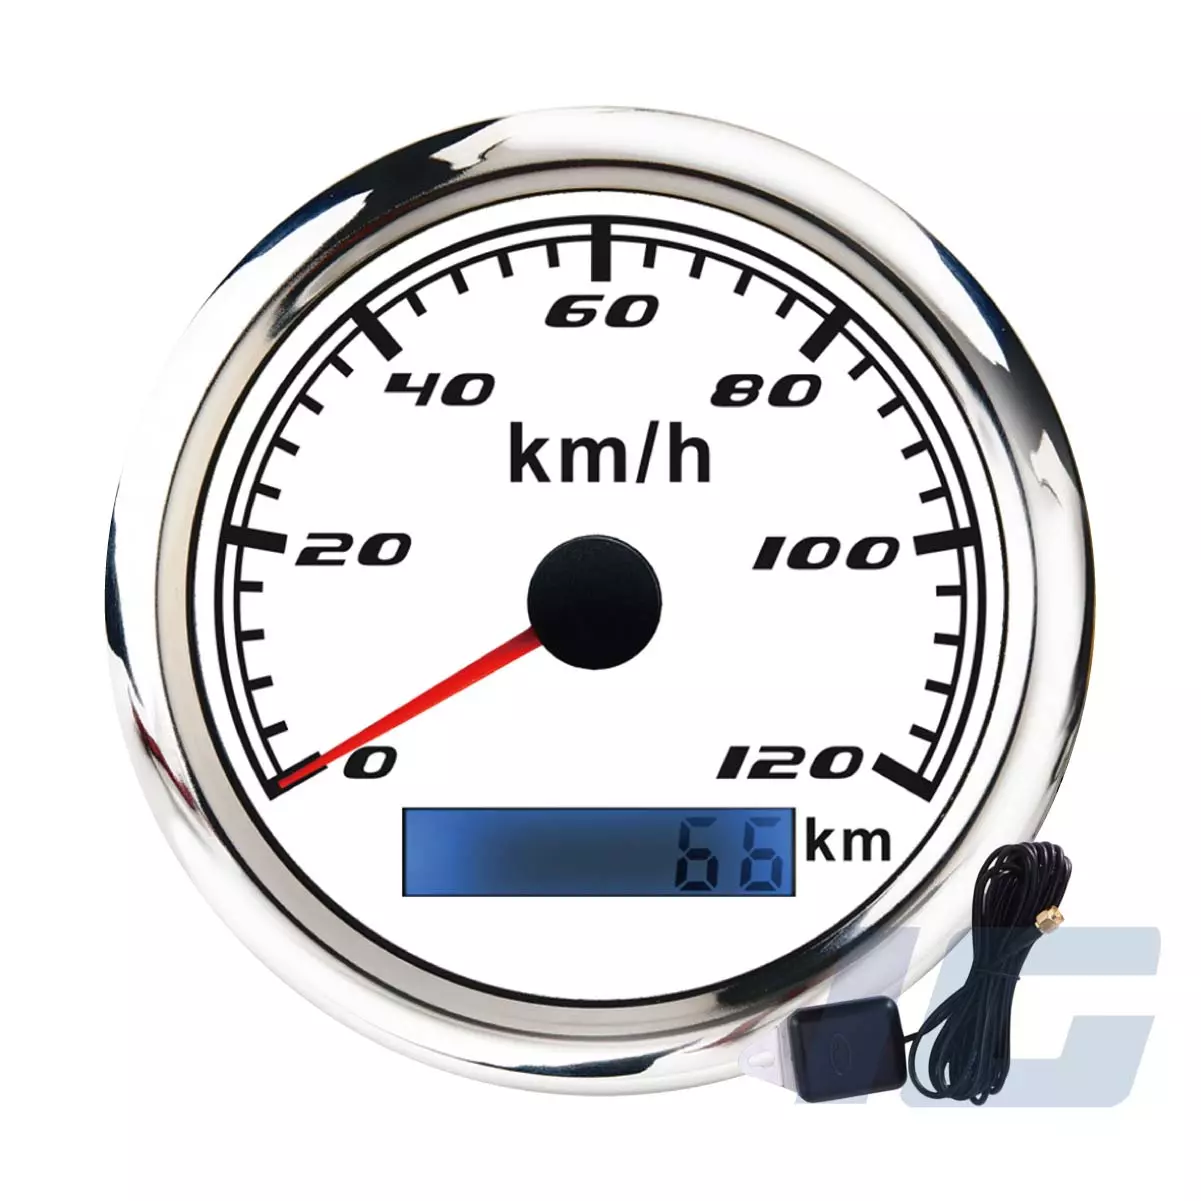 W Pro Series 85mm White Face Aftermarket Marine Gauge - 12V / 24V Speedometer with Odometer & GPS Sensor for Golf Vehicles, Golf Course Car- KMH, MPH, KNOT Indicator Meter Gauge kits for golf cart, golf vehicles, golf course car, electric golf carts, gas golf cart, golf cart parts